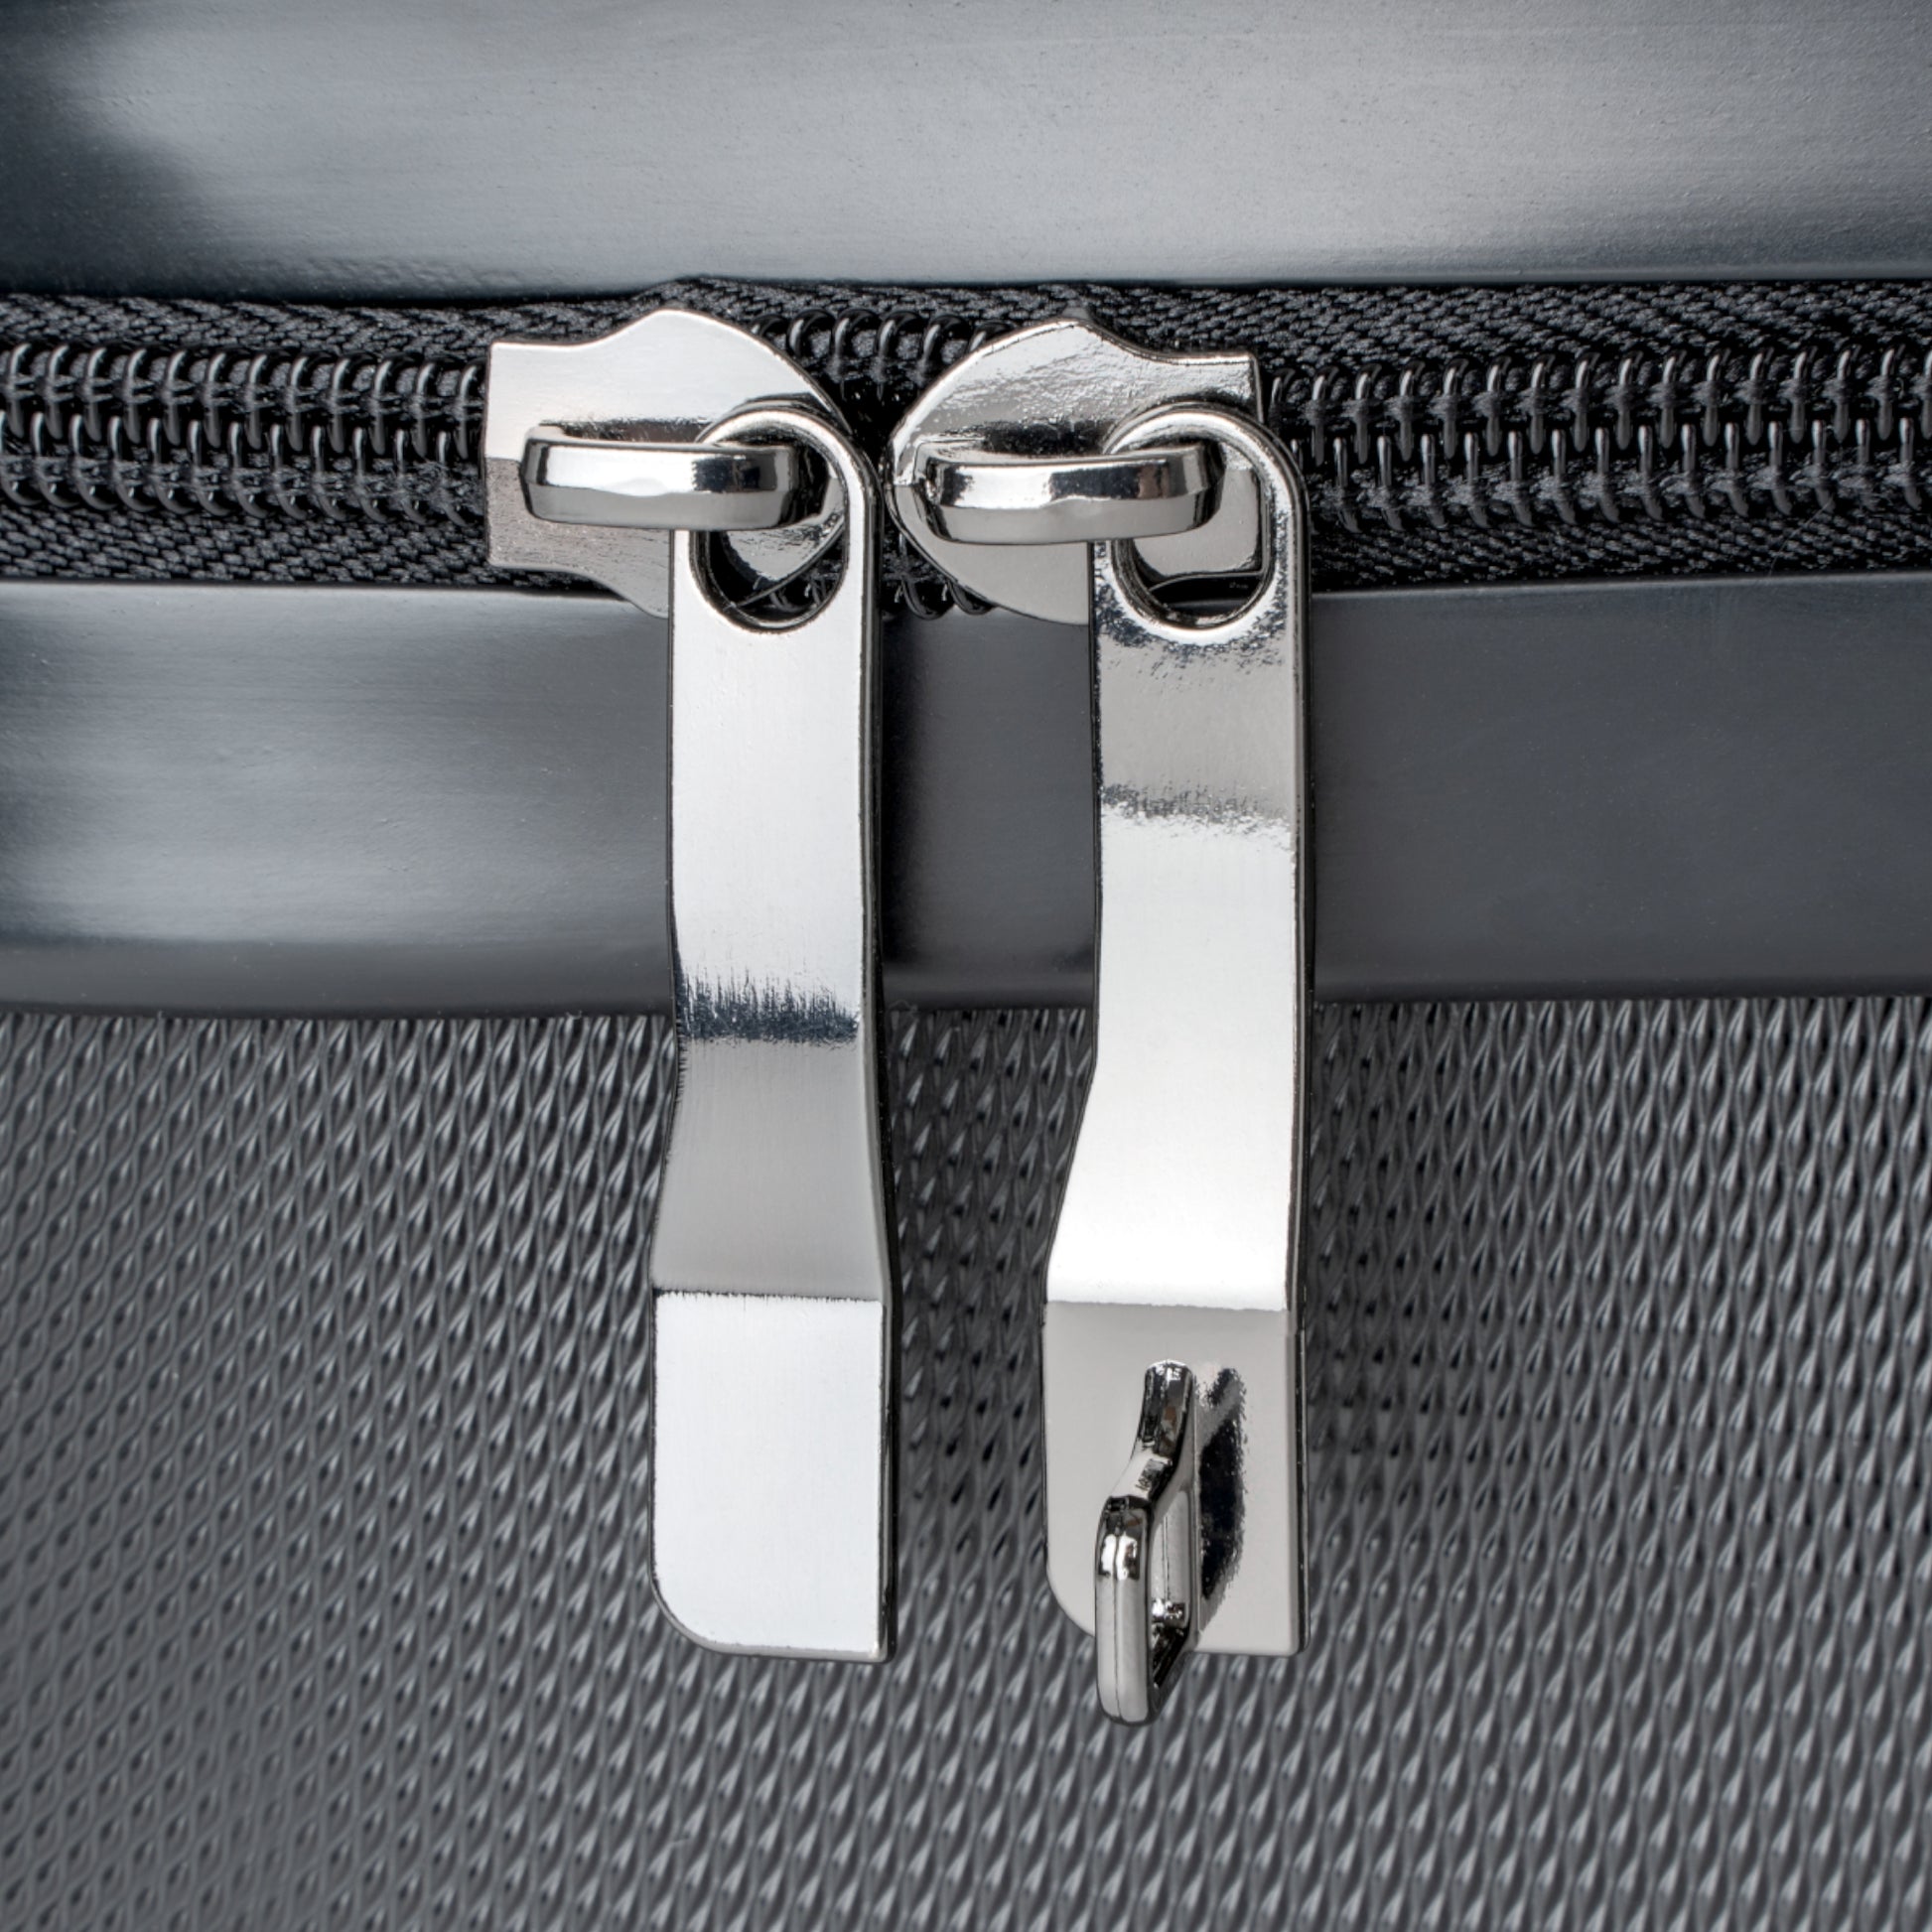 detail of stainless steel zipper tabs on suitcase